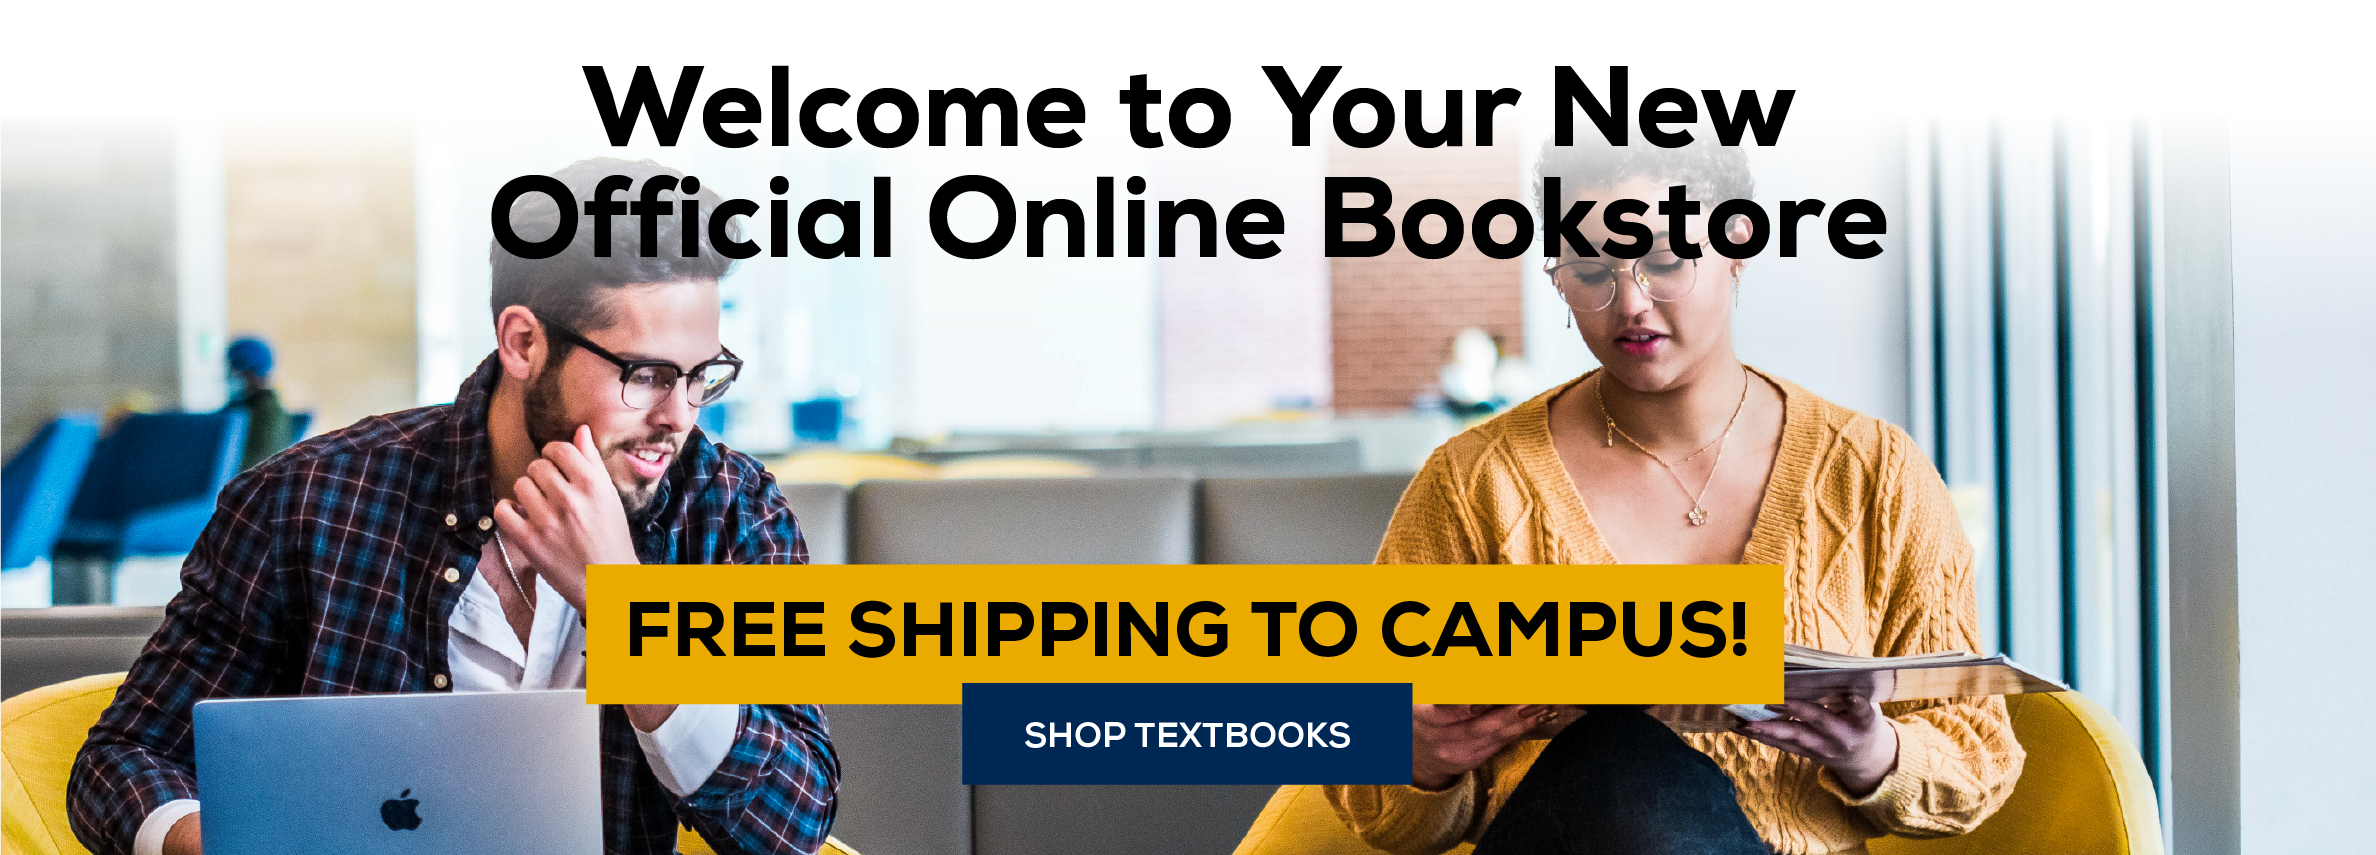 Welcome to Your Official Online! Bookstore Free Shipping to Campus. Shop Textbooks